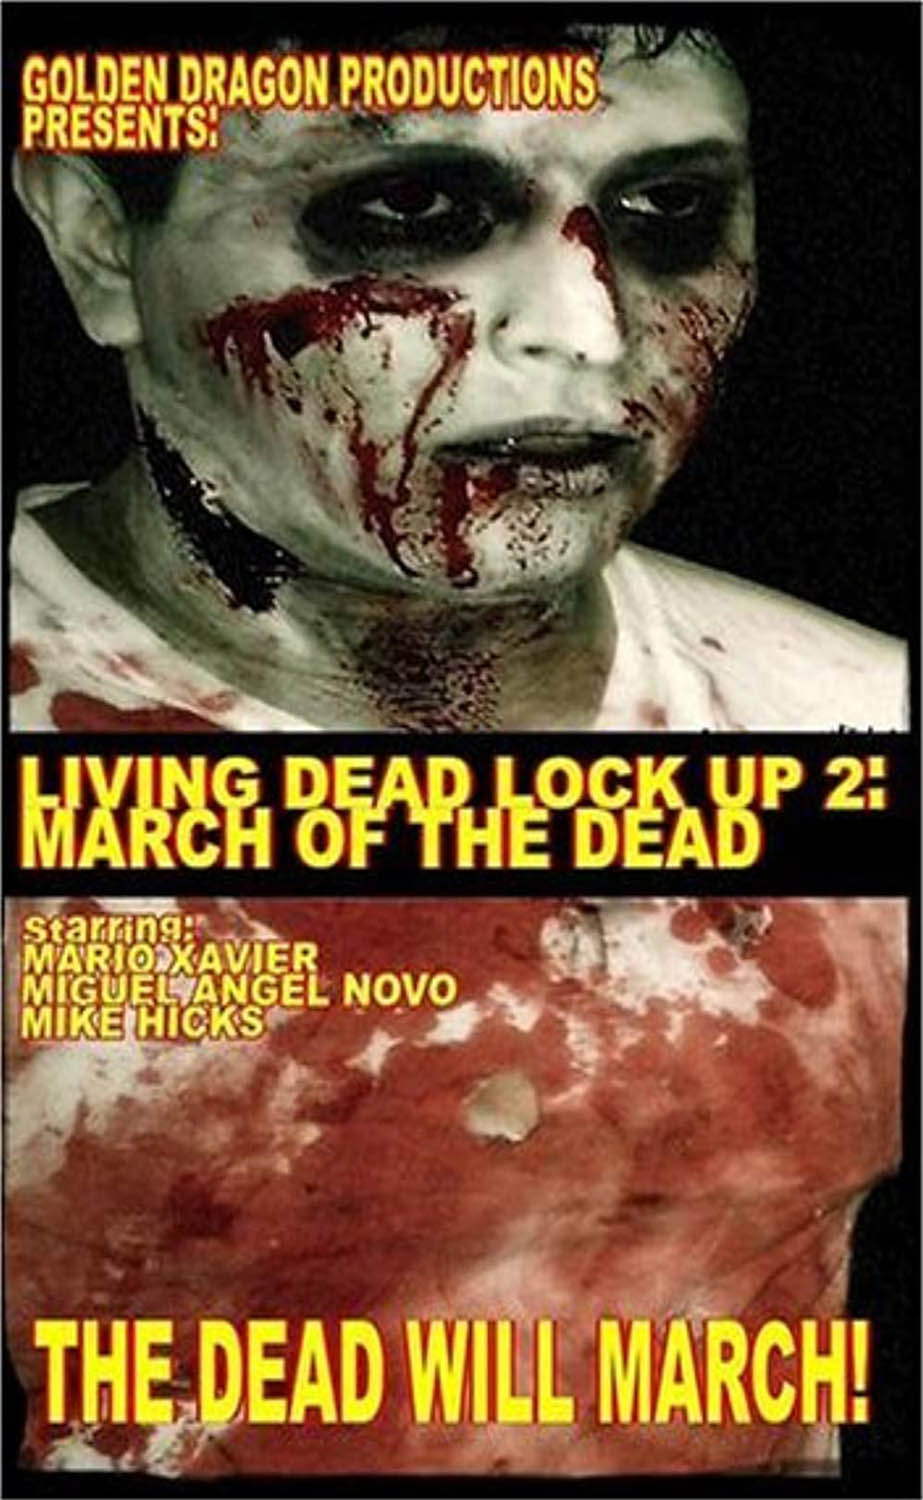 LIVING DEAD LOCK UP 2: MARCH OF THE DEAD